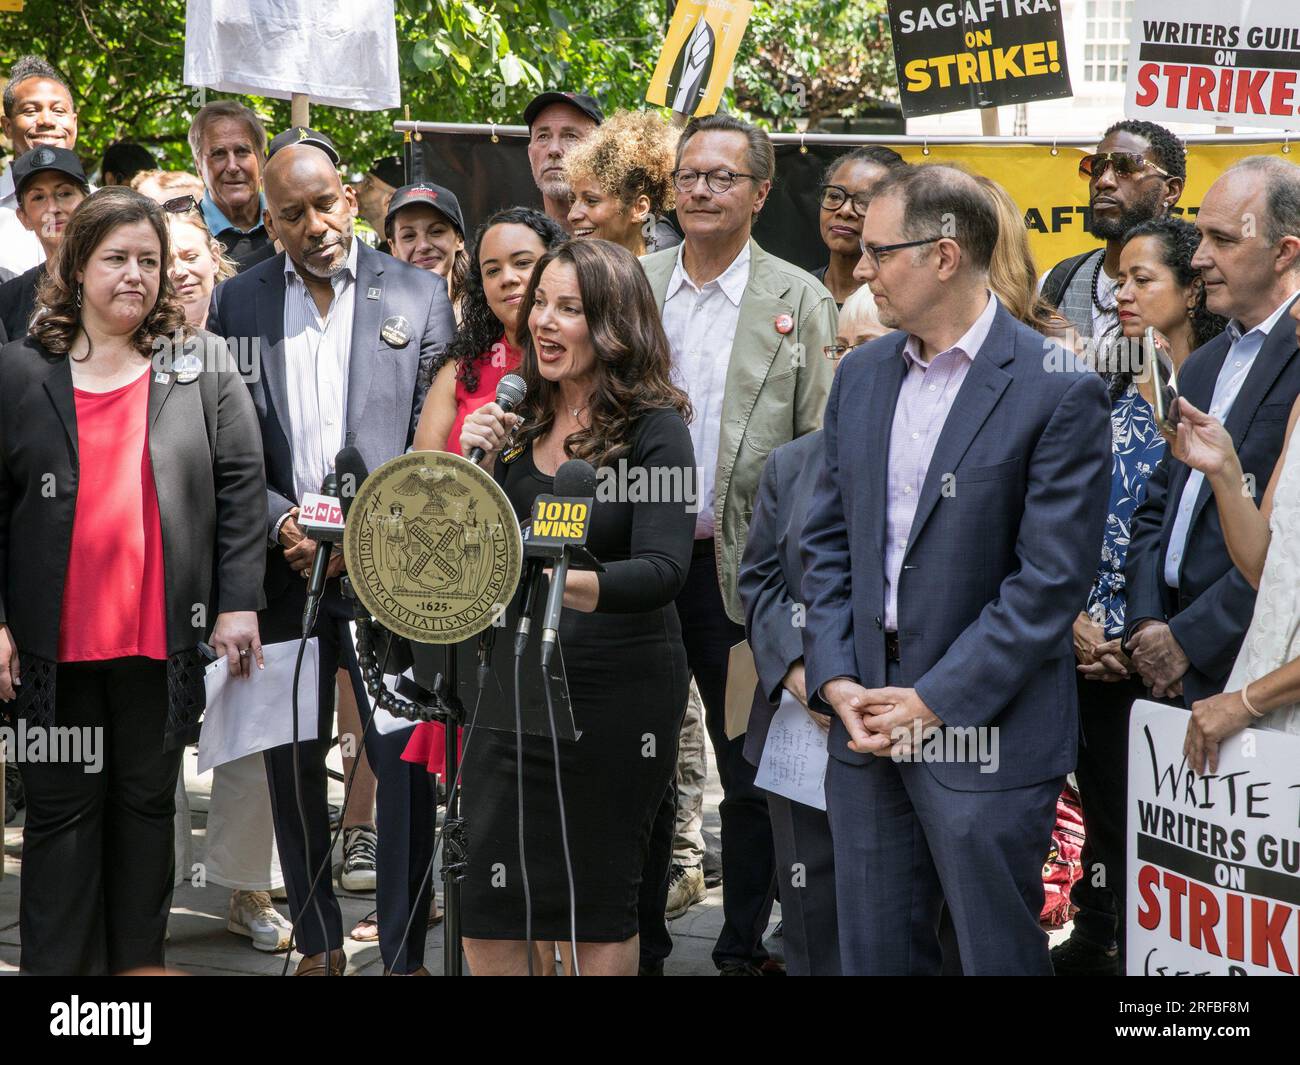 New York, NY, USA. 1st Aug, 2023. Rebecca Damon, Ezra Knight, Fran Drescher, Lowell Peterson at a public appearance for WGA & SAG-AFTRA Solidarity Rally, City Hall Park, New York, NY August 1, 2023. Credit: Christina DeOrtentiis/Everett Collection/Alamy Live News Stock Photo